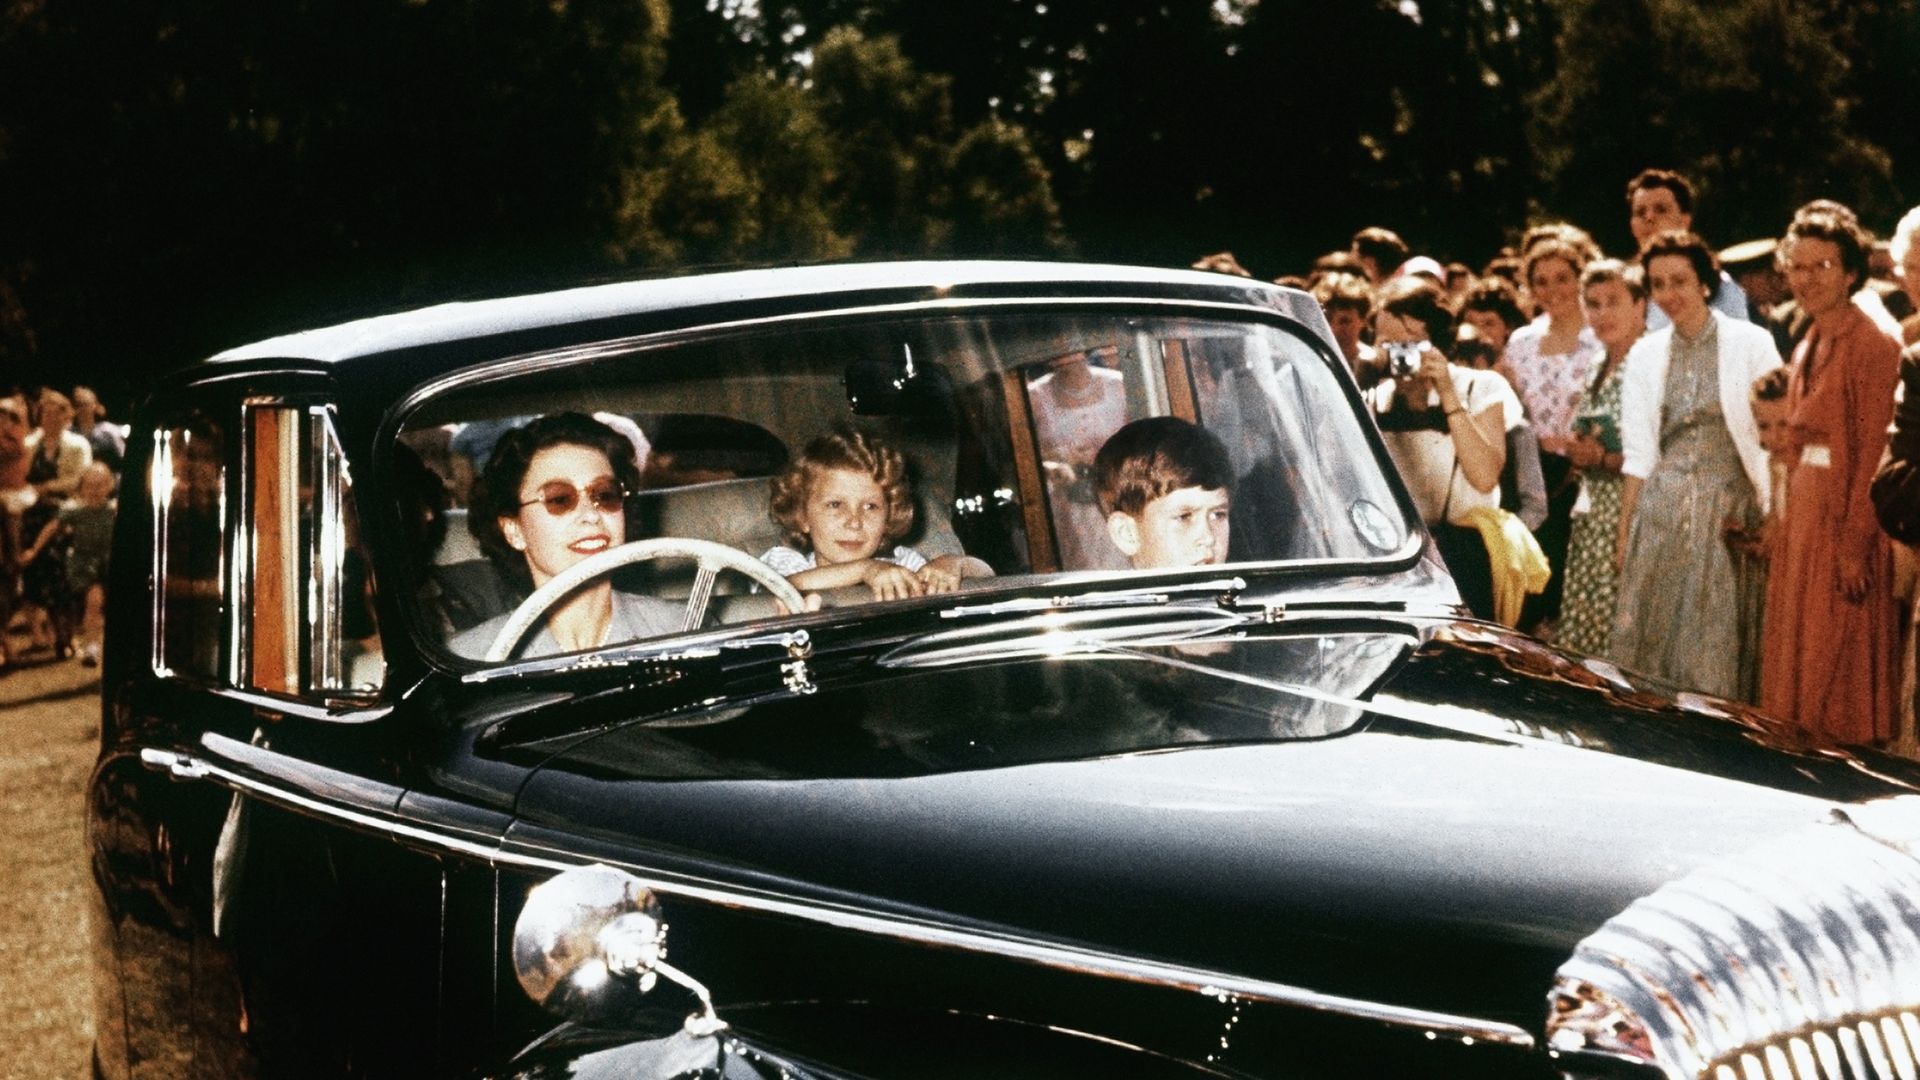 The late Queen in a vintage car with a young Prince Charles and Princess Anne